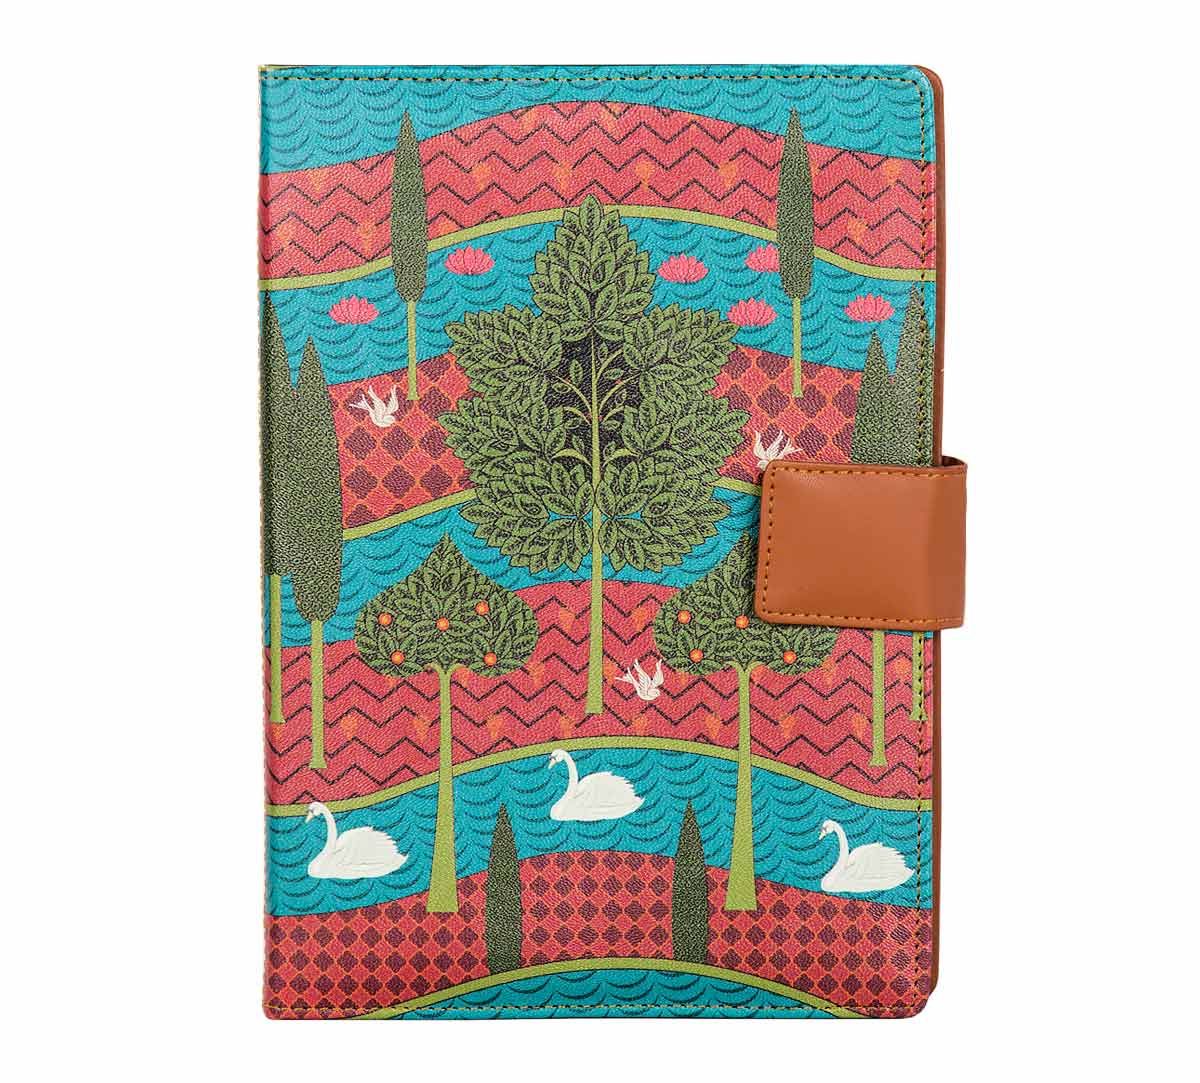 India Circus Timber Trails Notebook Planner